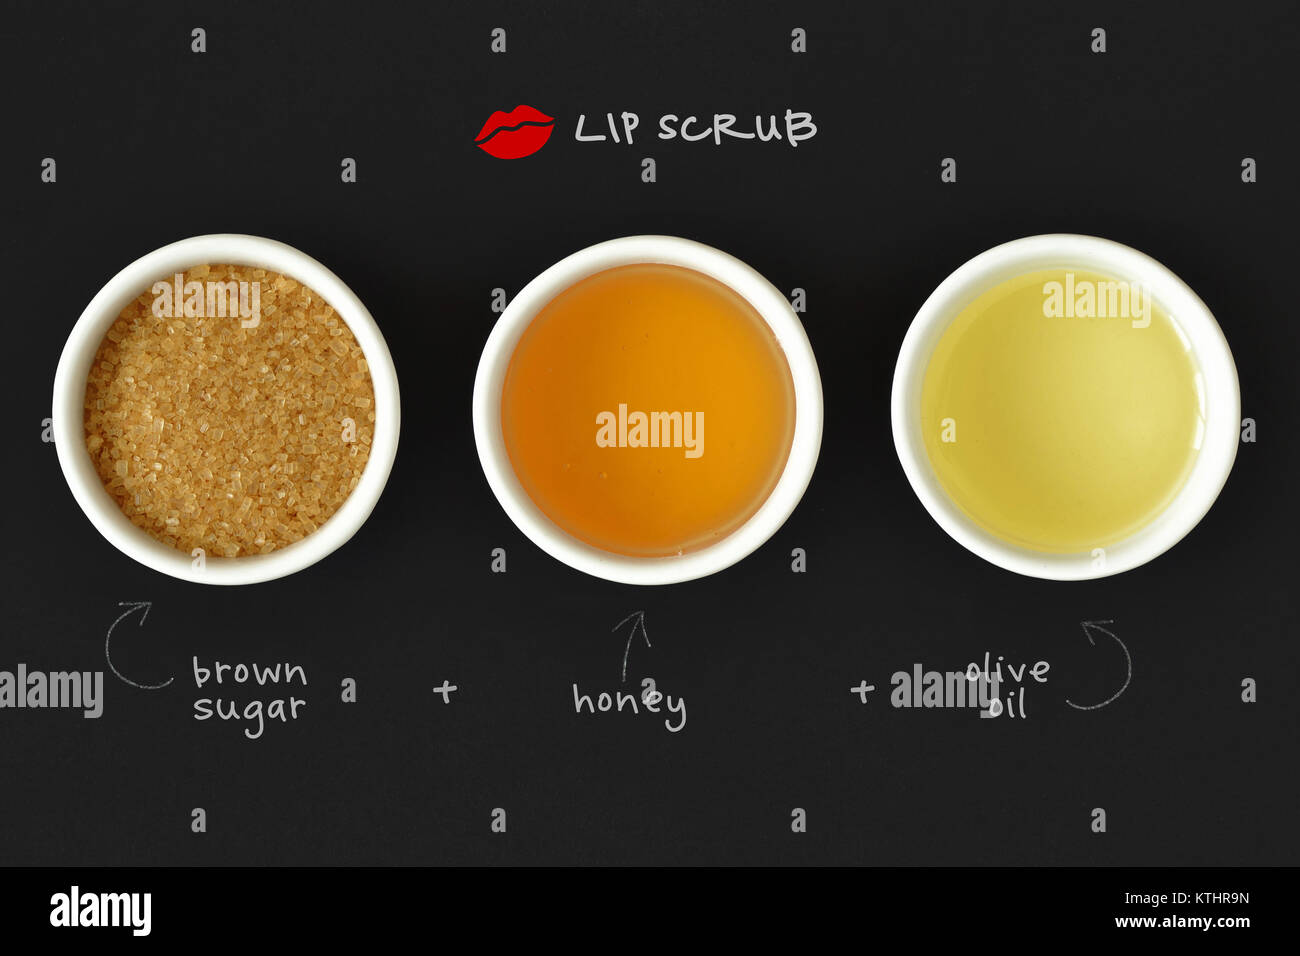 Homemade lip scrub made out of brown sugar, honey and olive oil - Black background Stock Photo